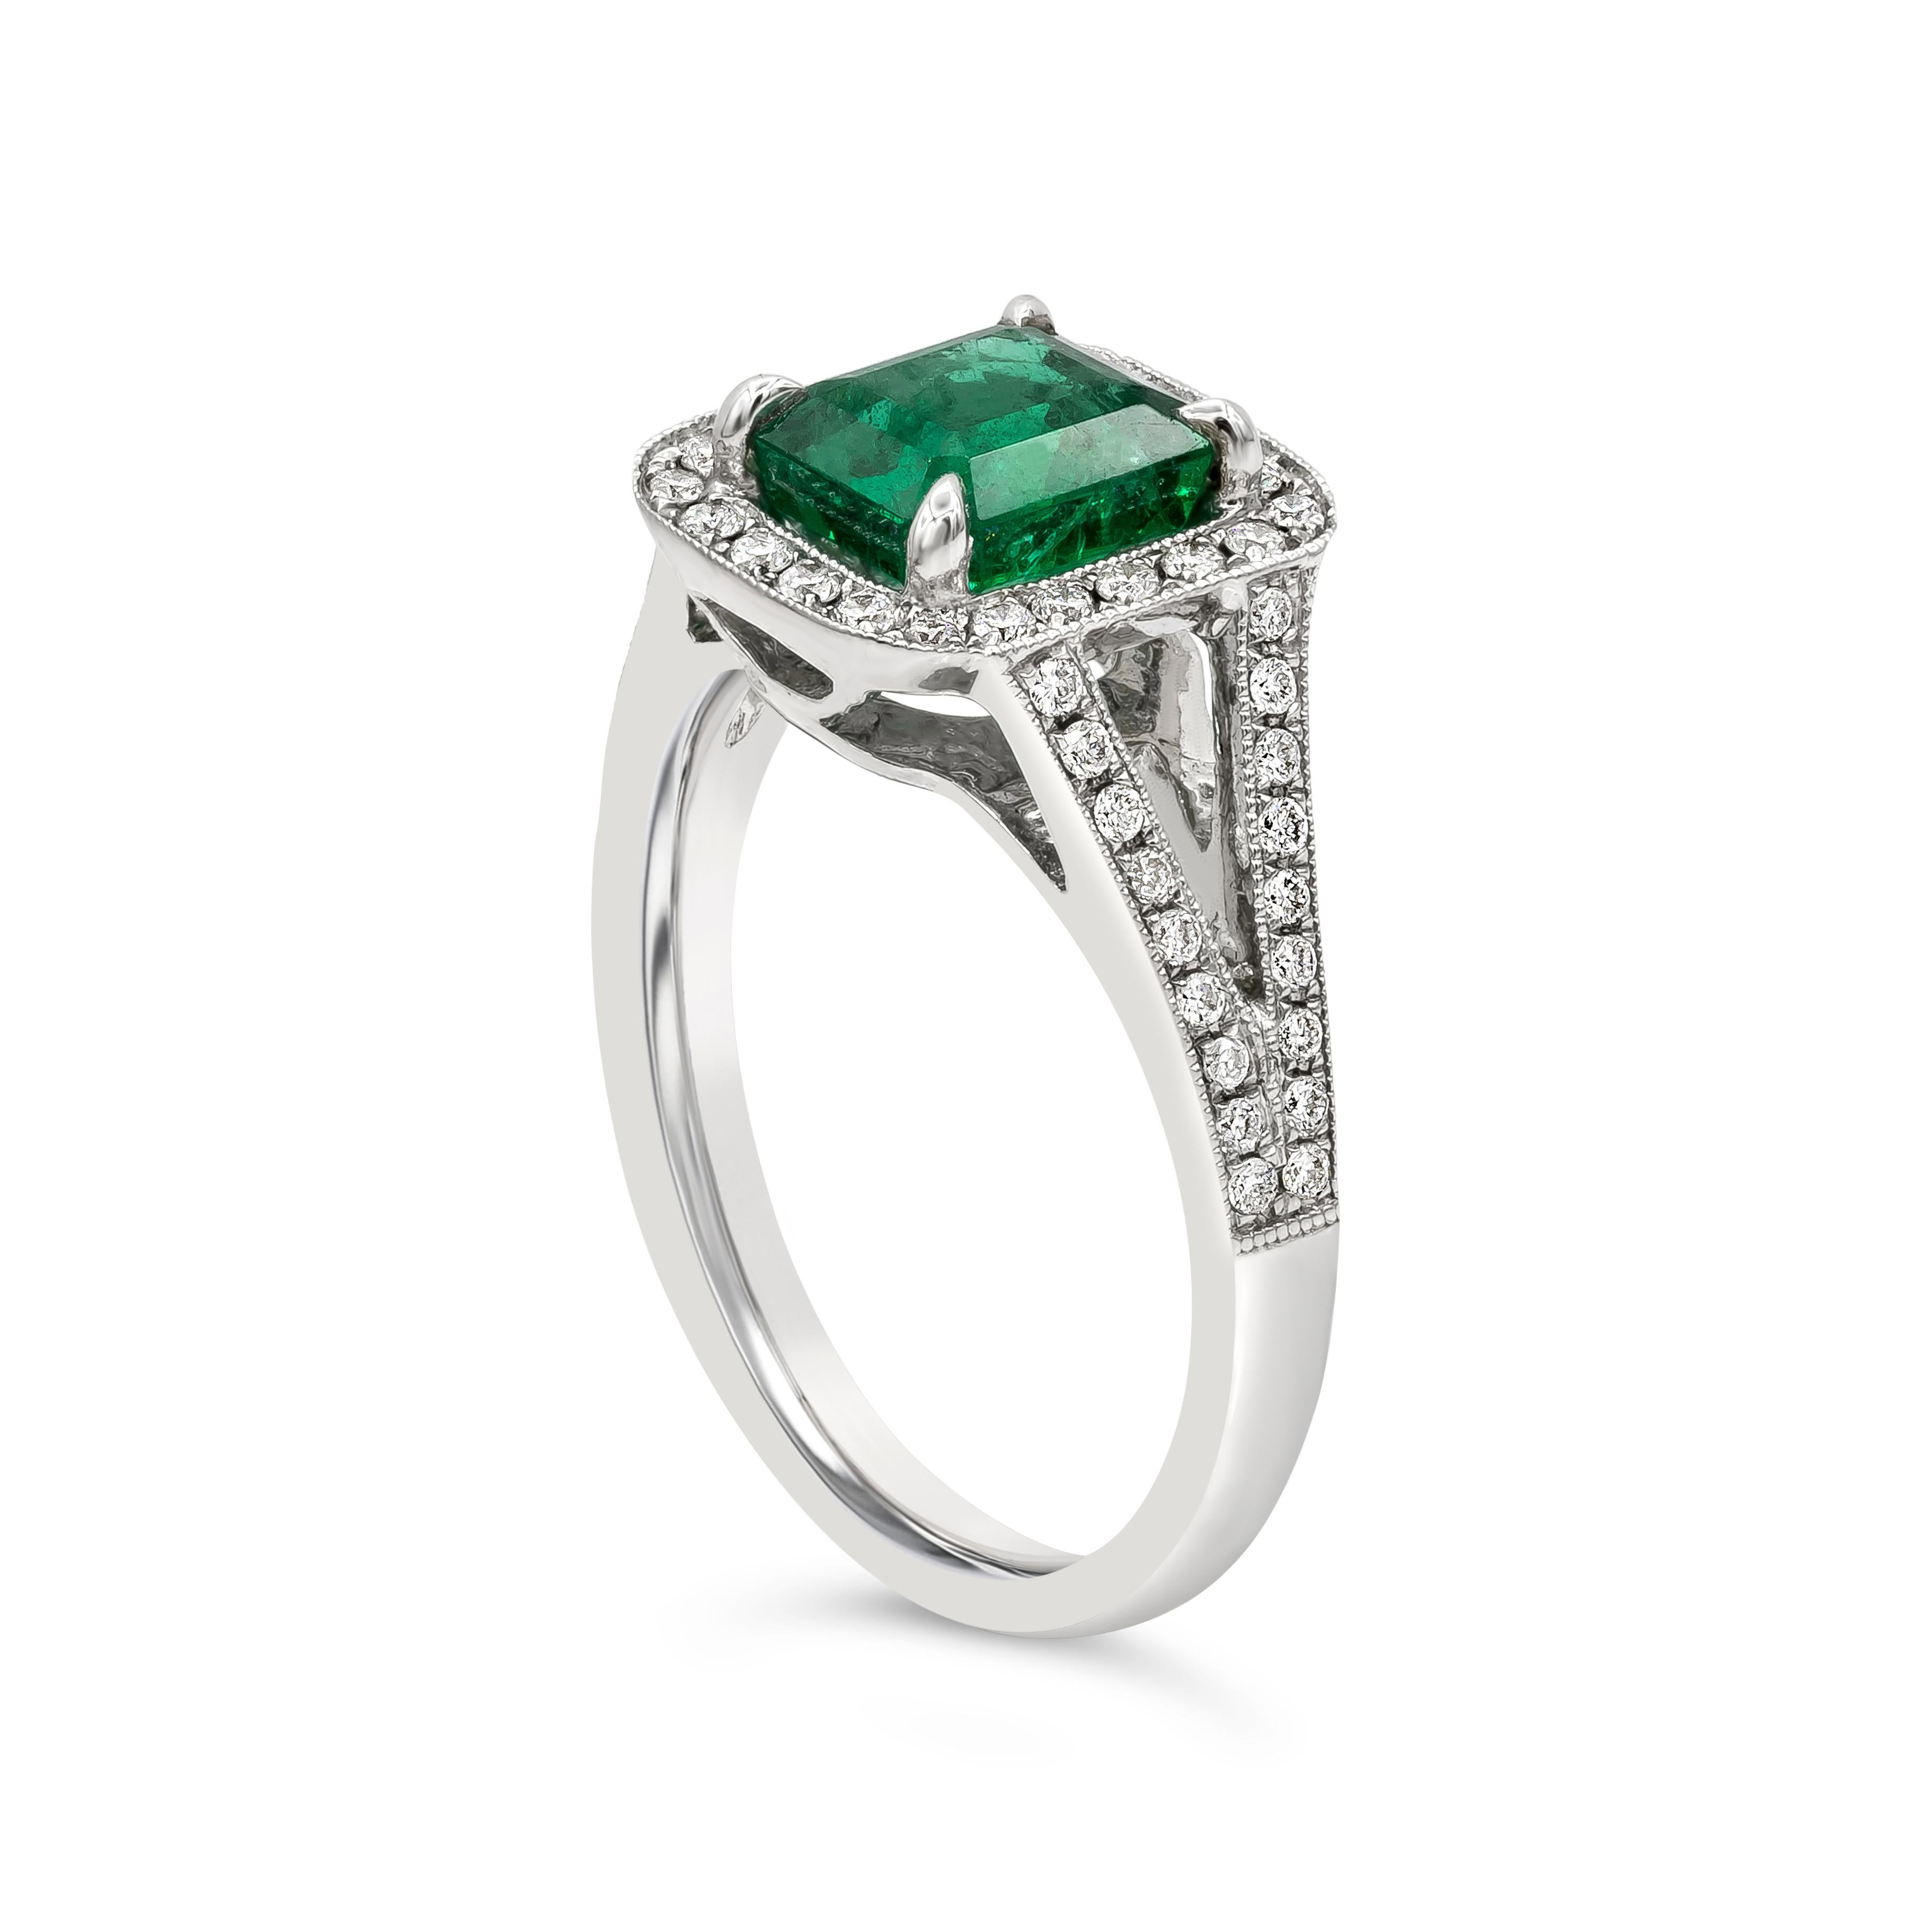 Features a 1.68 carats emerald cut green emerald, surrounded by a single row of round brilliant diamonds set in an antique style split-shank setting. Accent diamonds weigh 0.40 carats total. Finished with milgraine edges for that added antique feel.